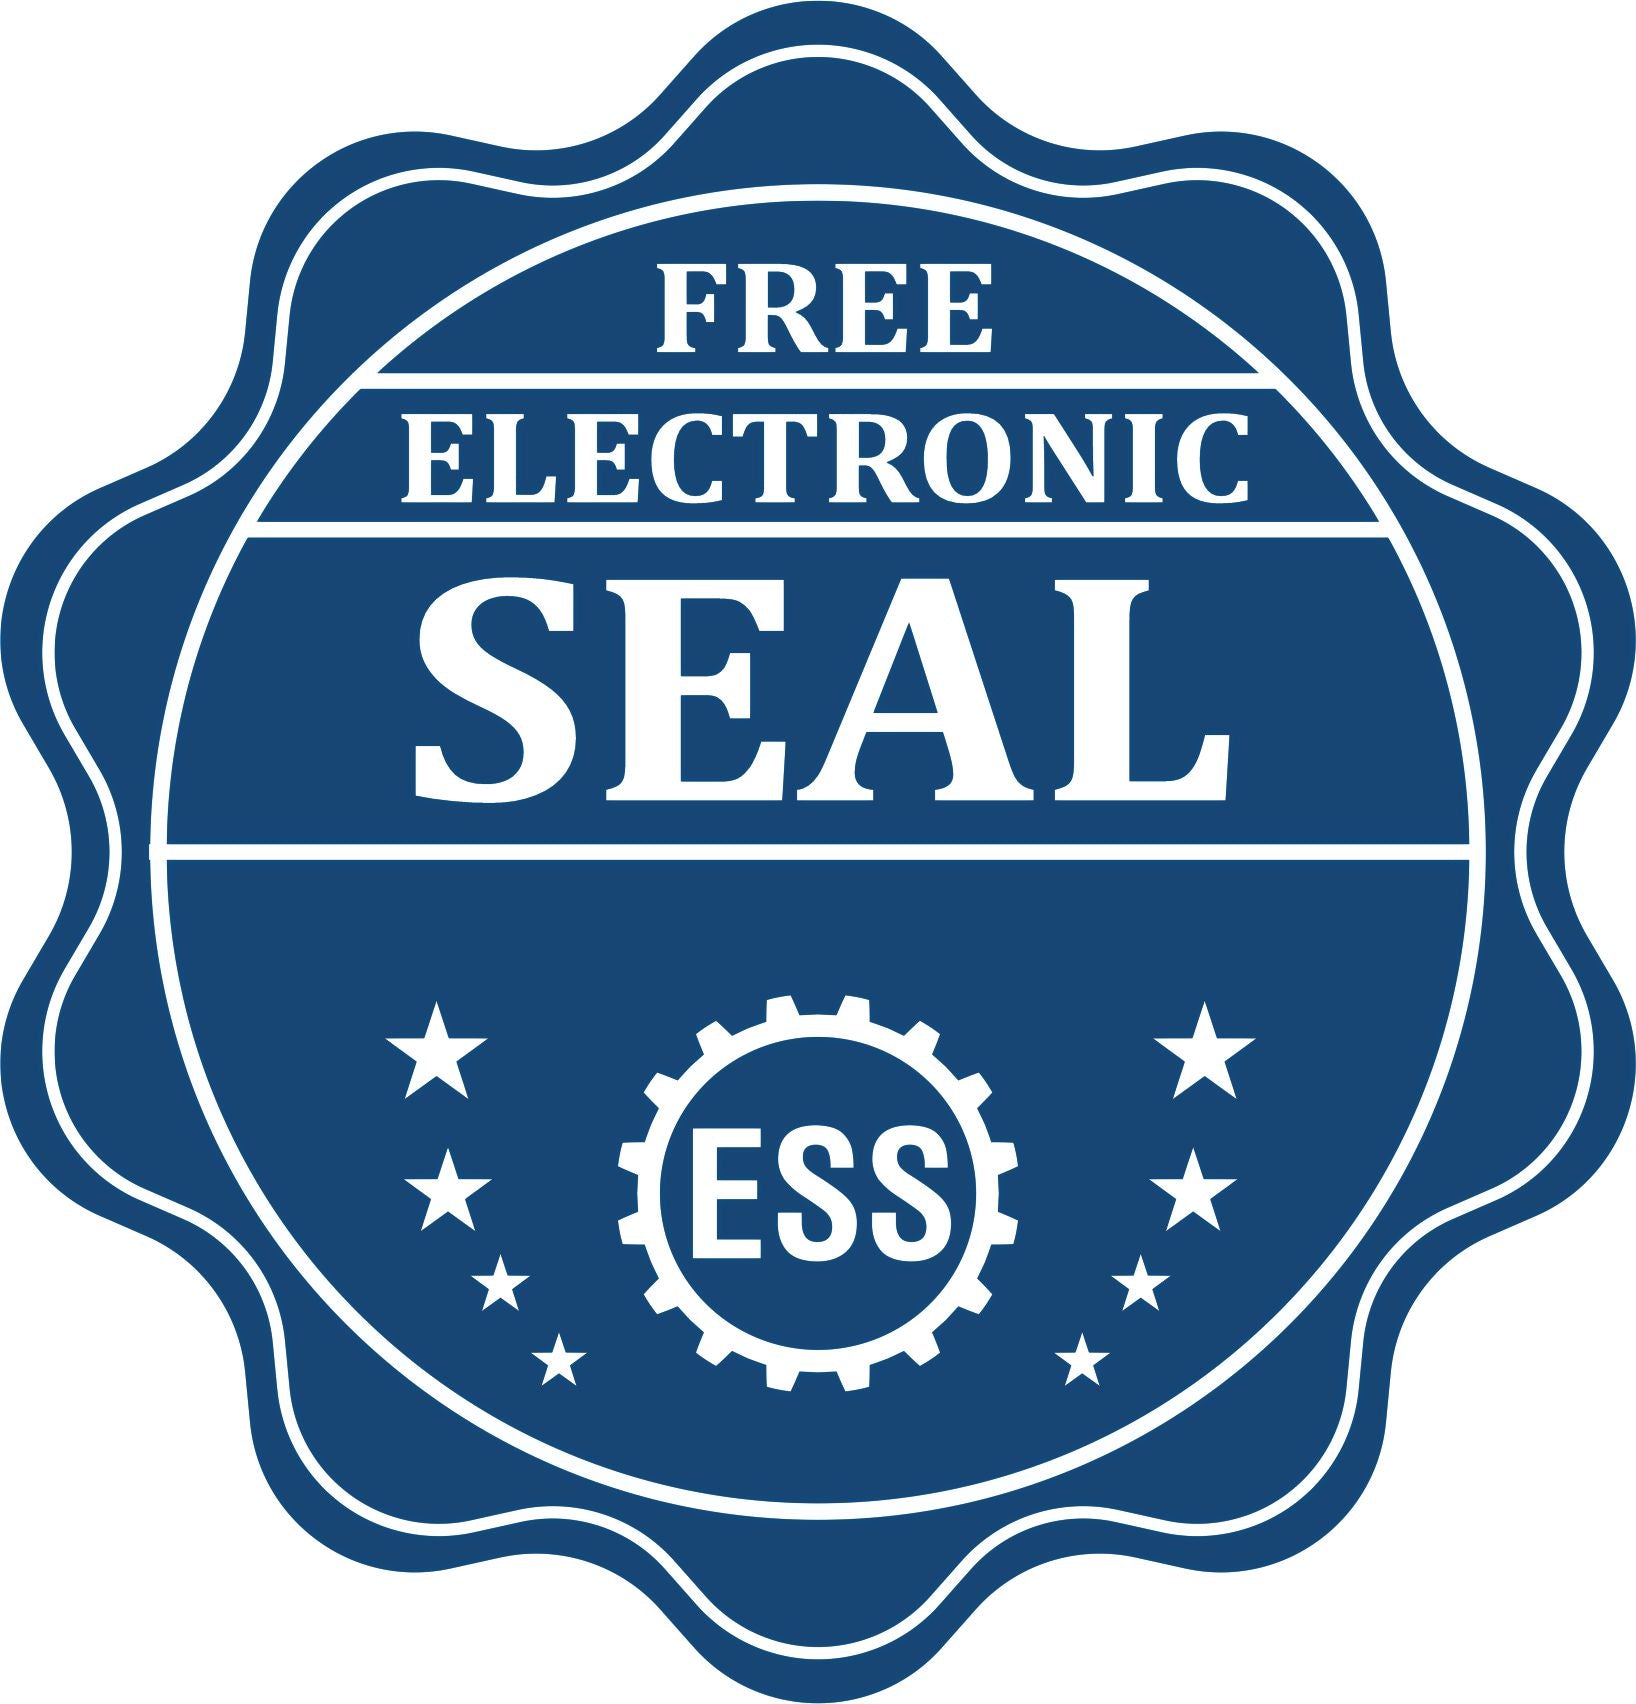 A badge showing a free electronic seal for the Slim Pre-Inked Kansas Professional Engineer Seal Stamp with stars and the ESS gear on the emblem.